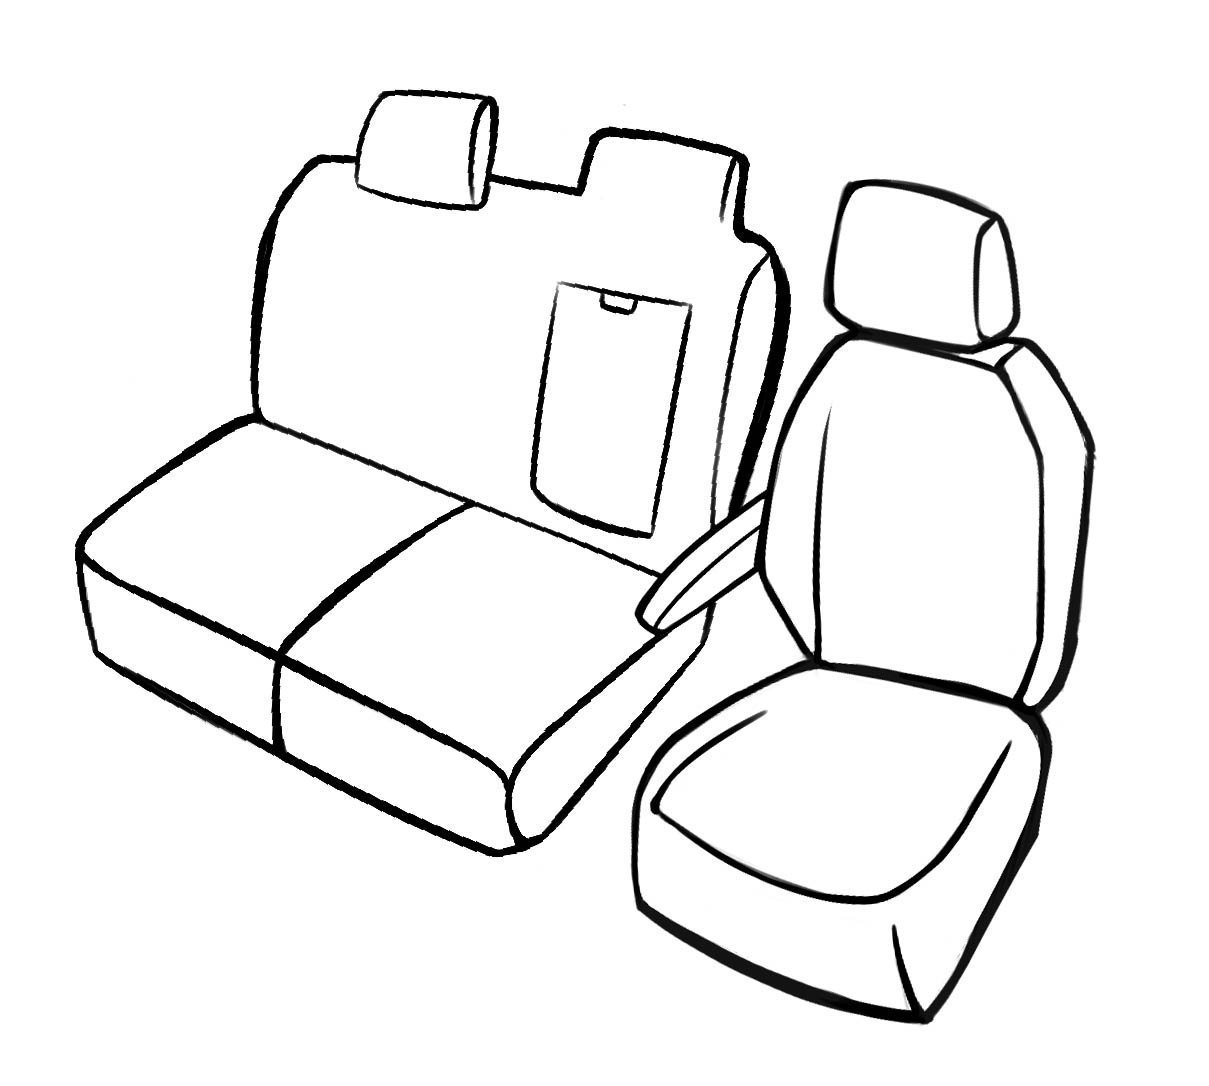 Premium Seat Cover for Peugeot Expert 2016-Today, 1 single seat cover front + armrest cover, 1 double bench cover